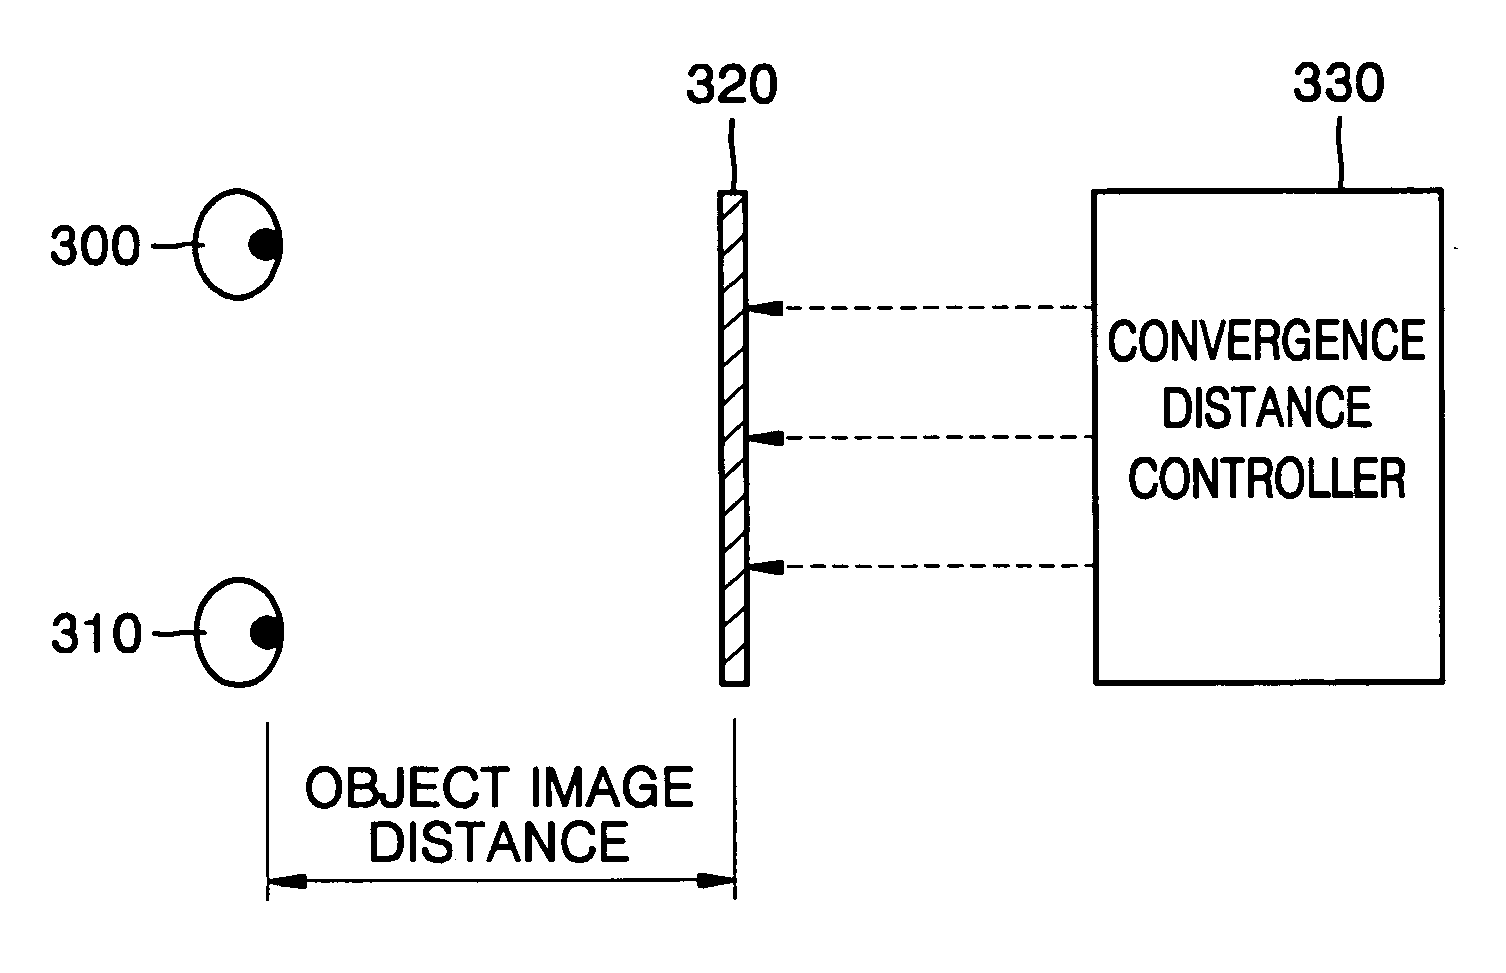 Method and apparatus for controlling convergence distance for observation of 3D image